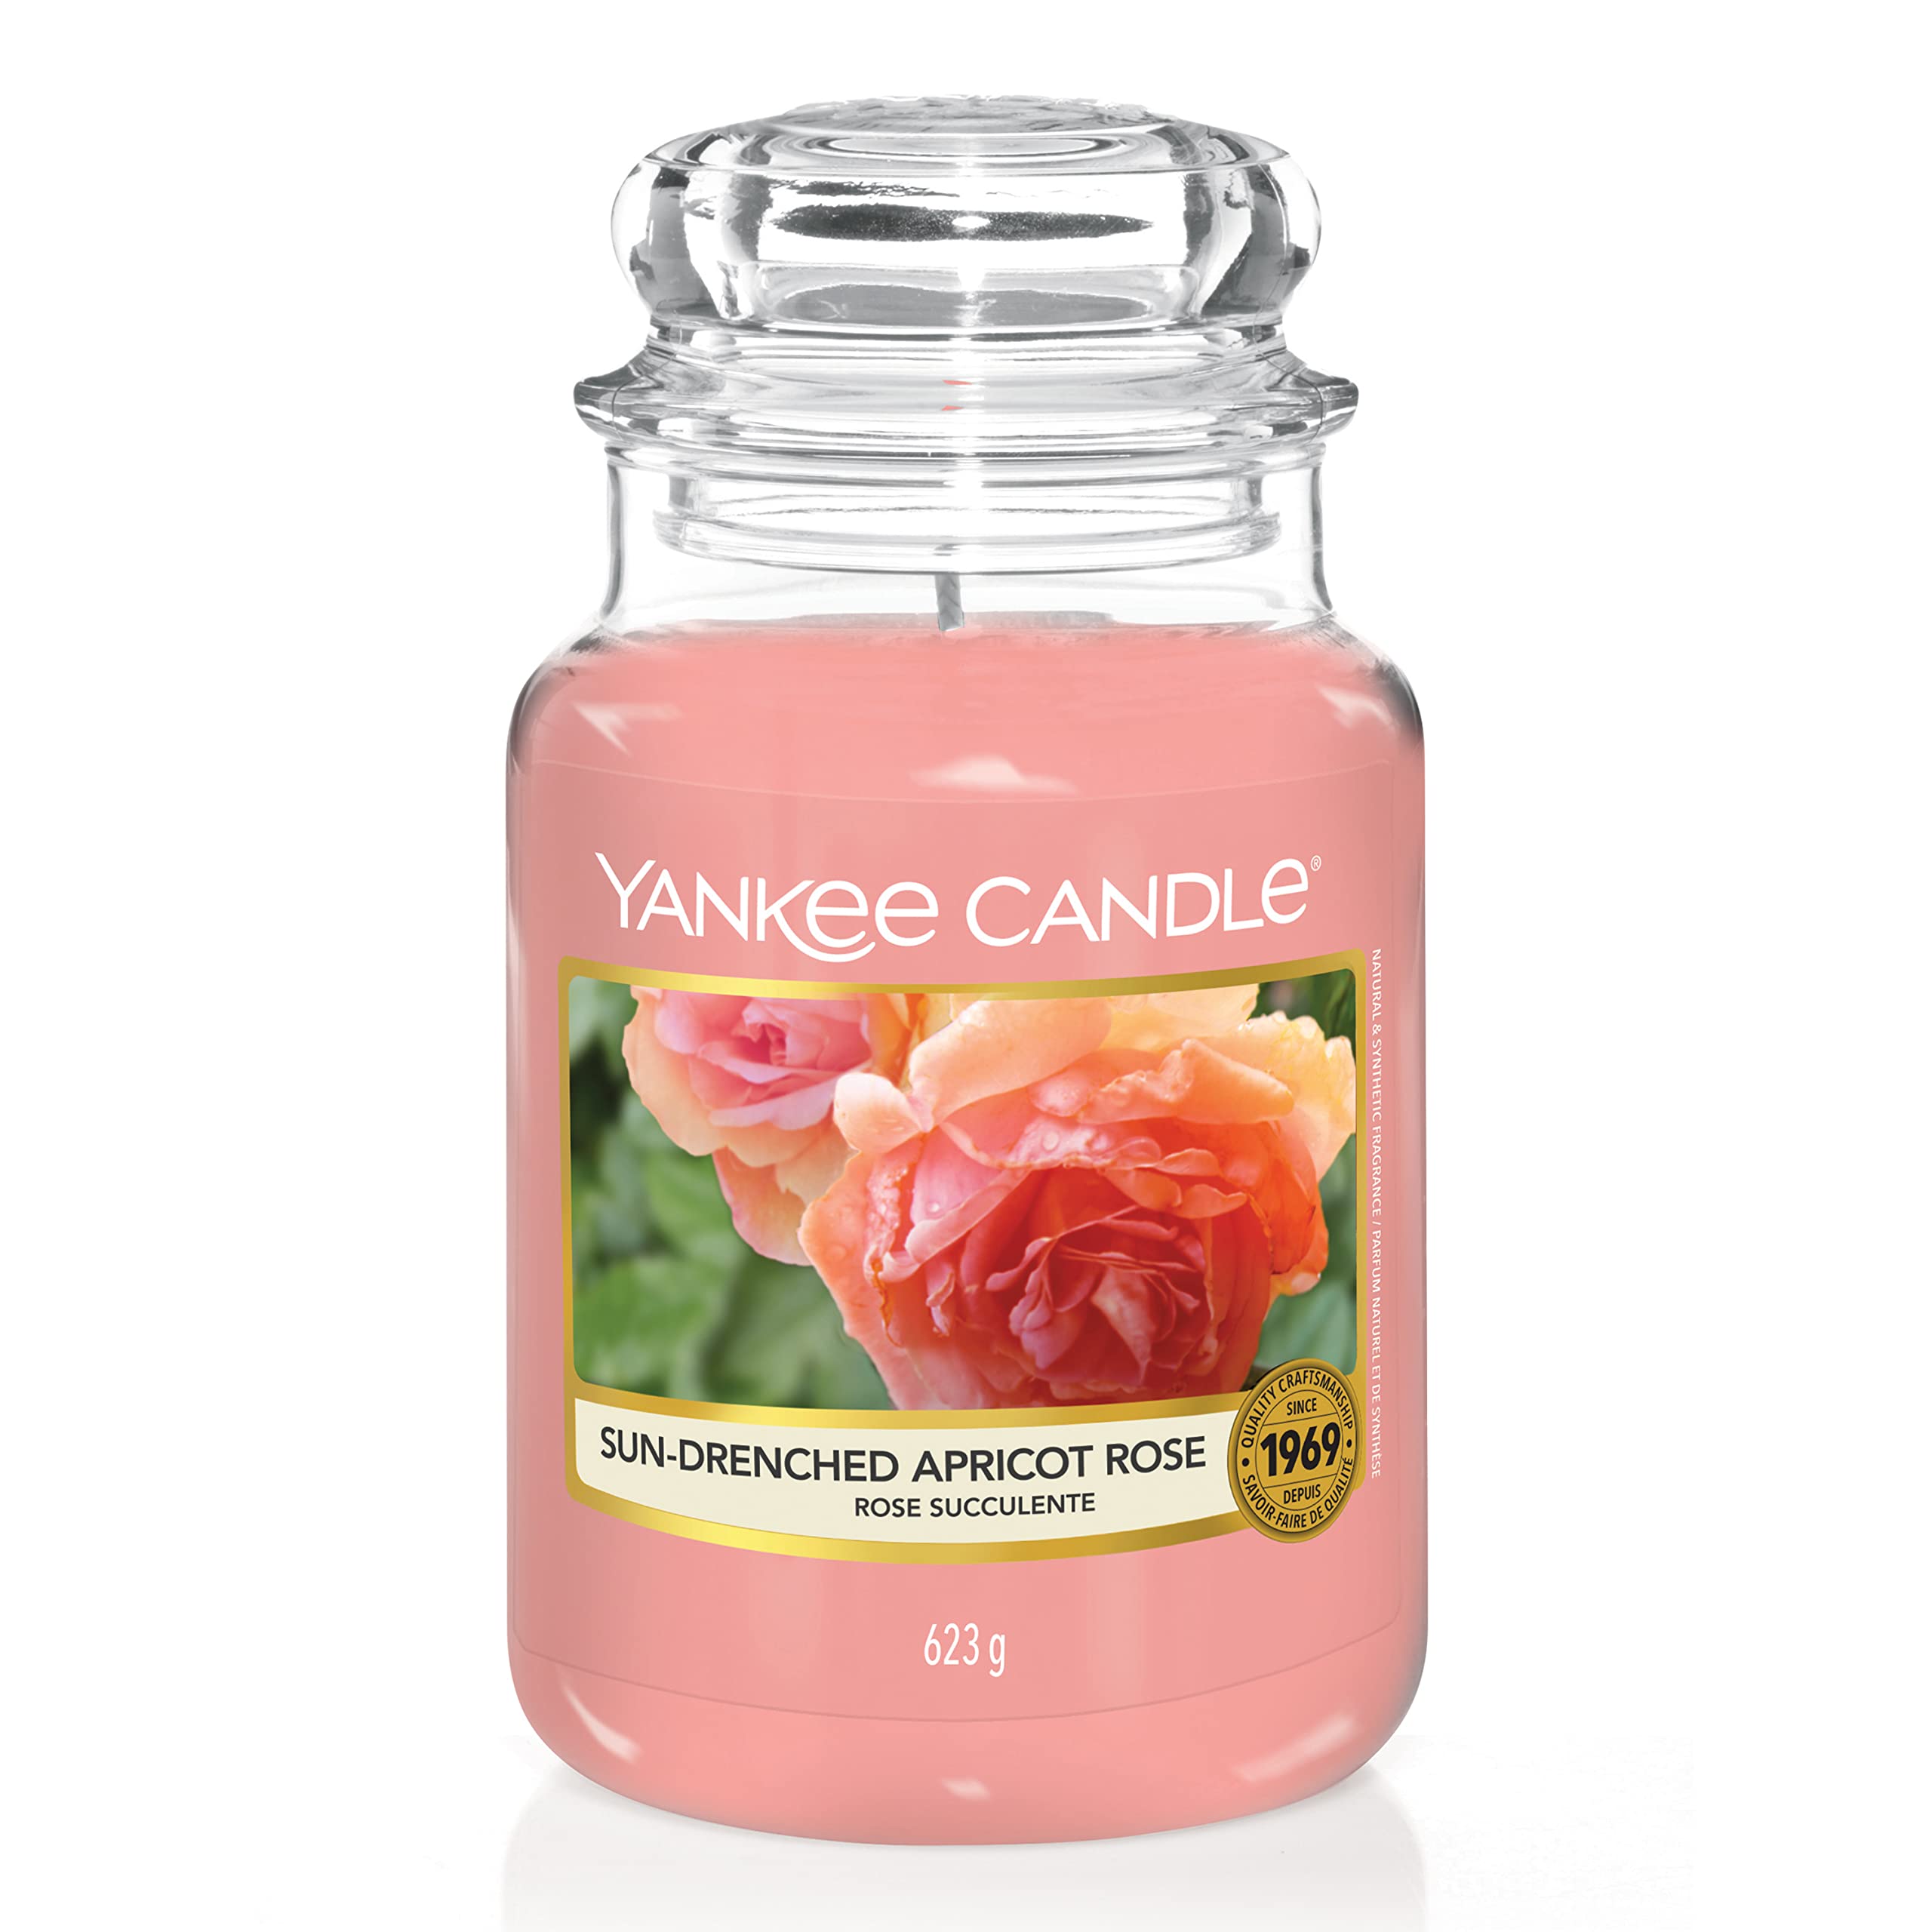 Vela | Sun-drenched apricot rose – 623g | YANKEE CANDLE